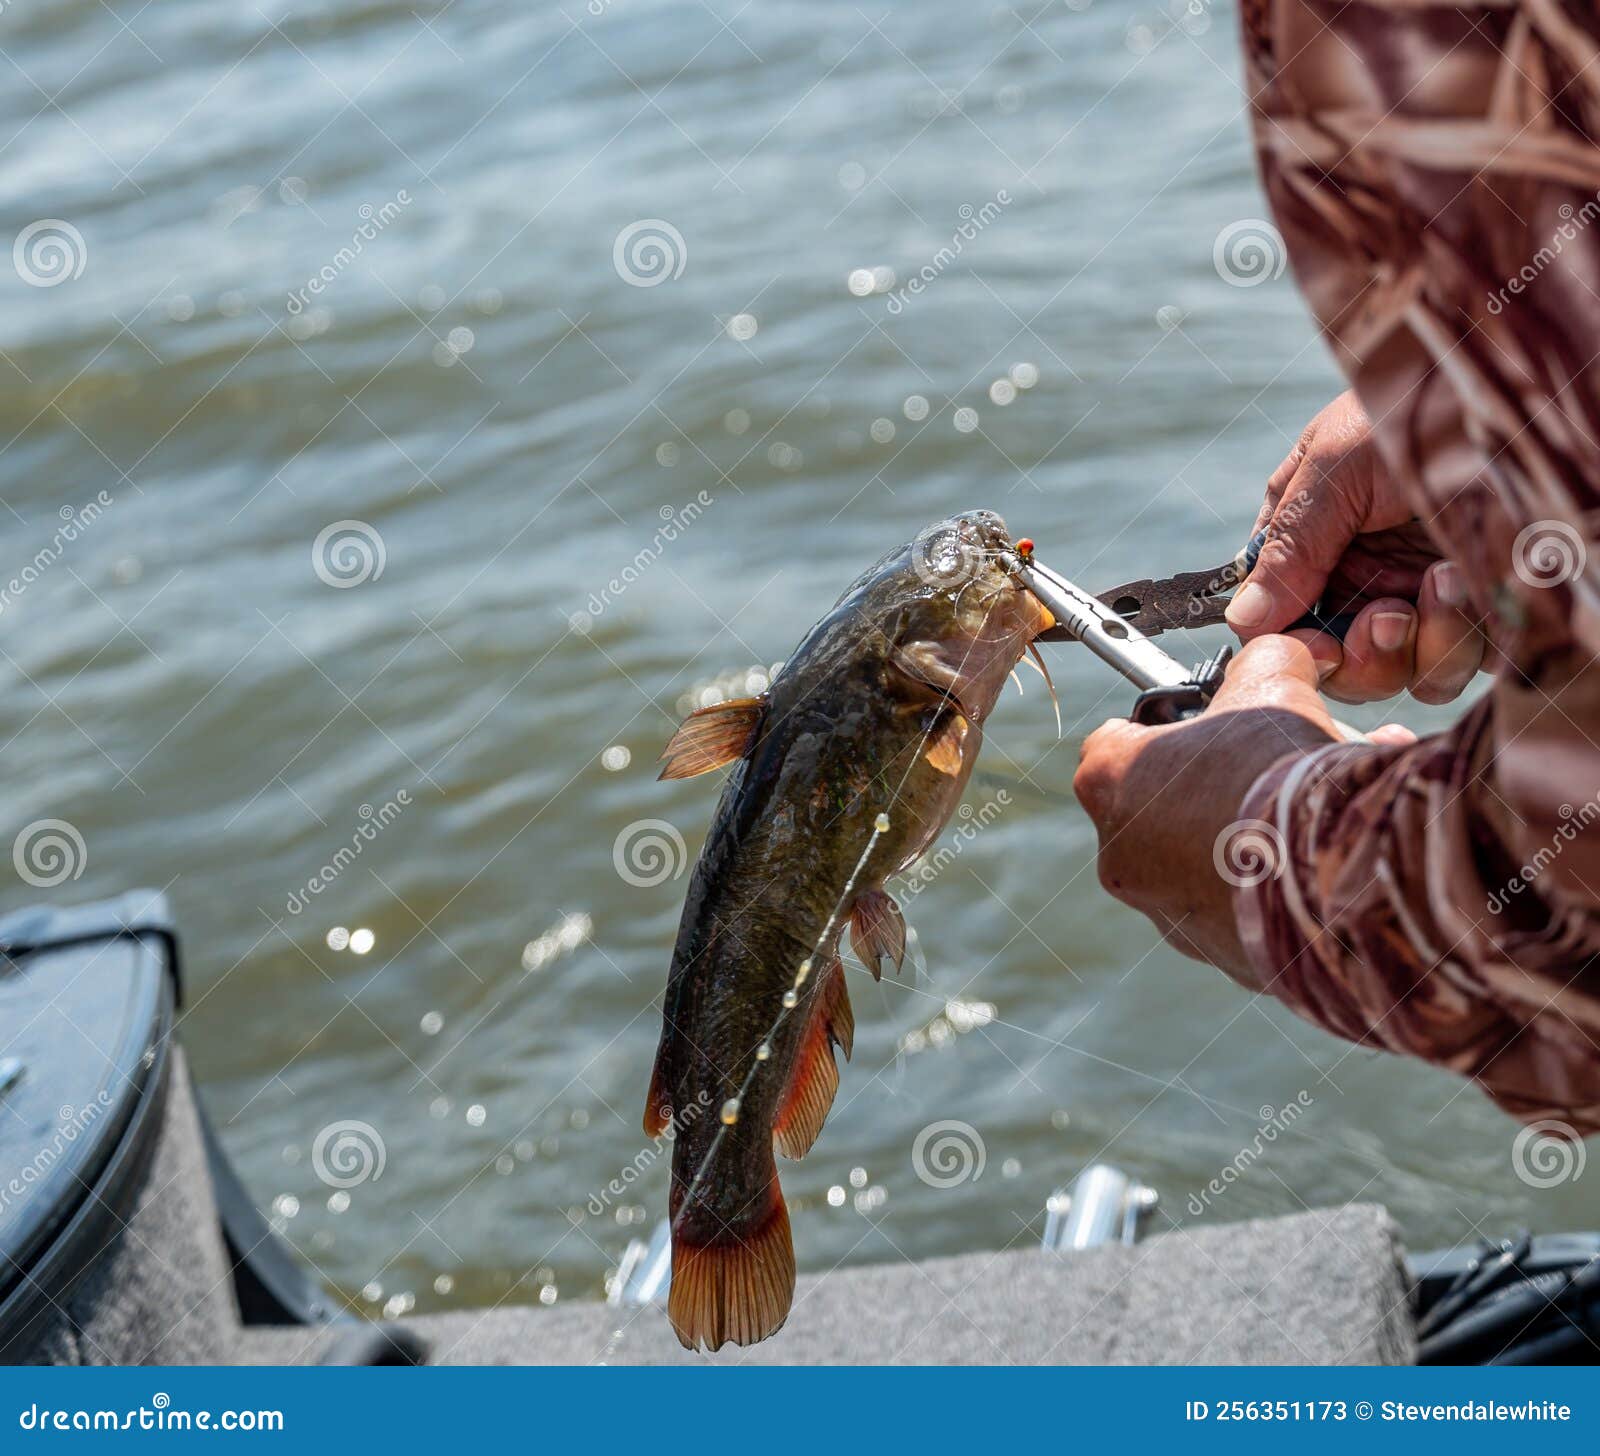 Fisherman Removing the Hook from a Catfish Using Pliers. Stock